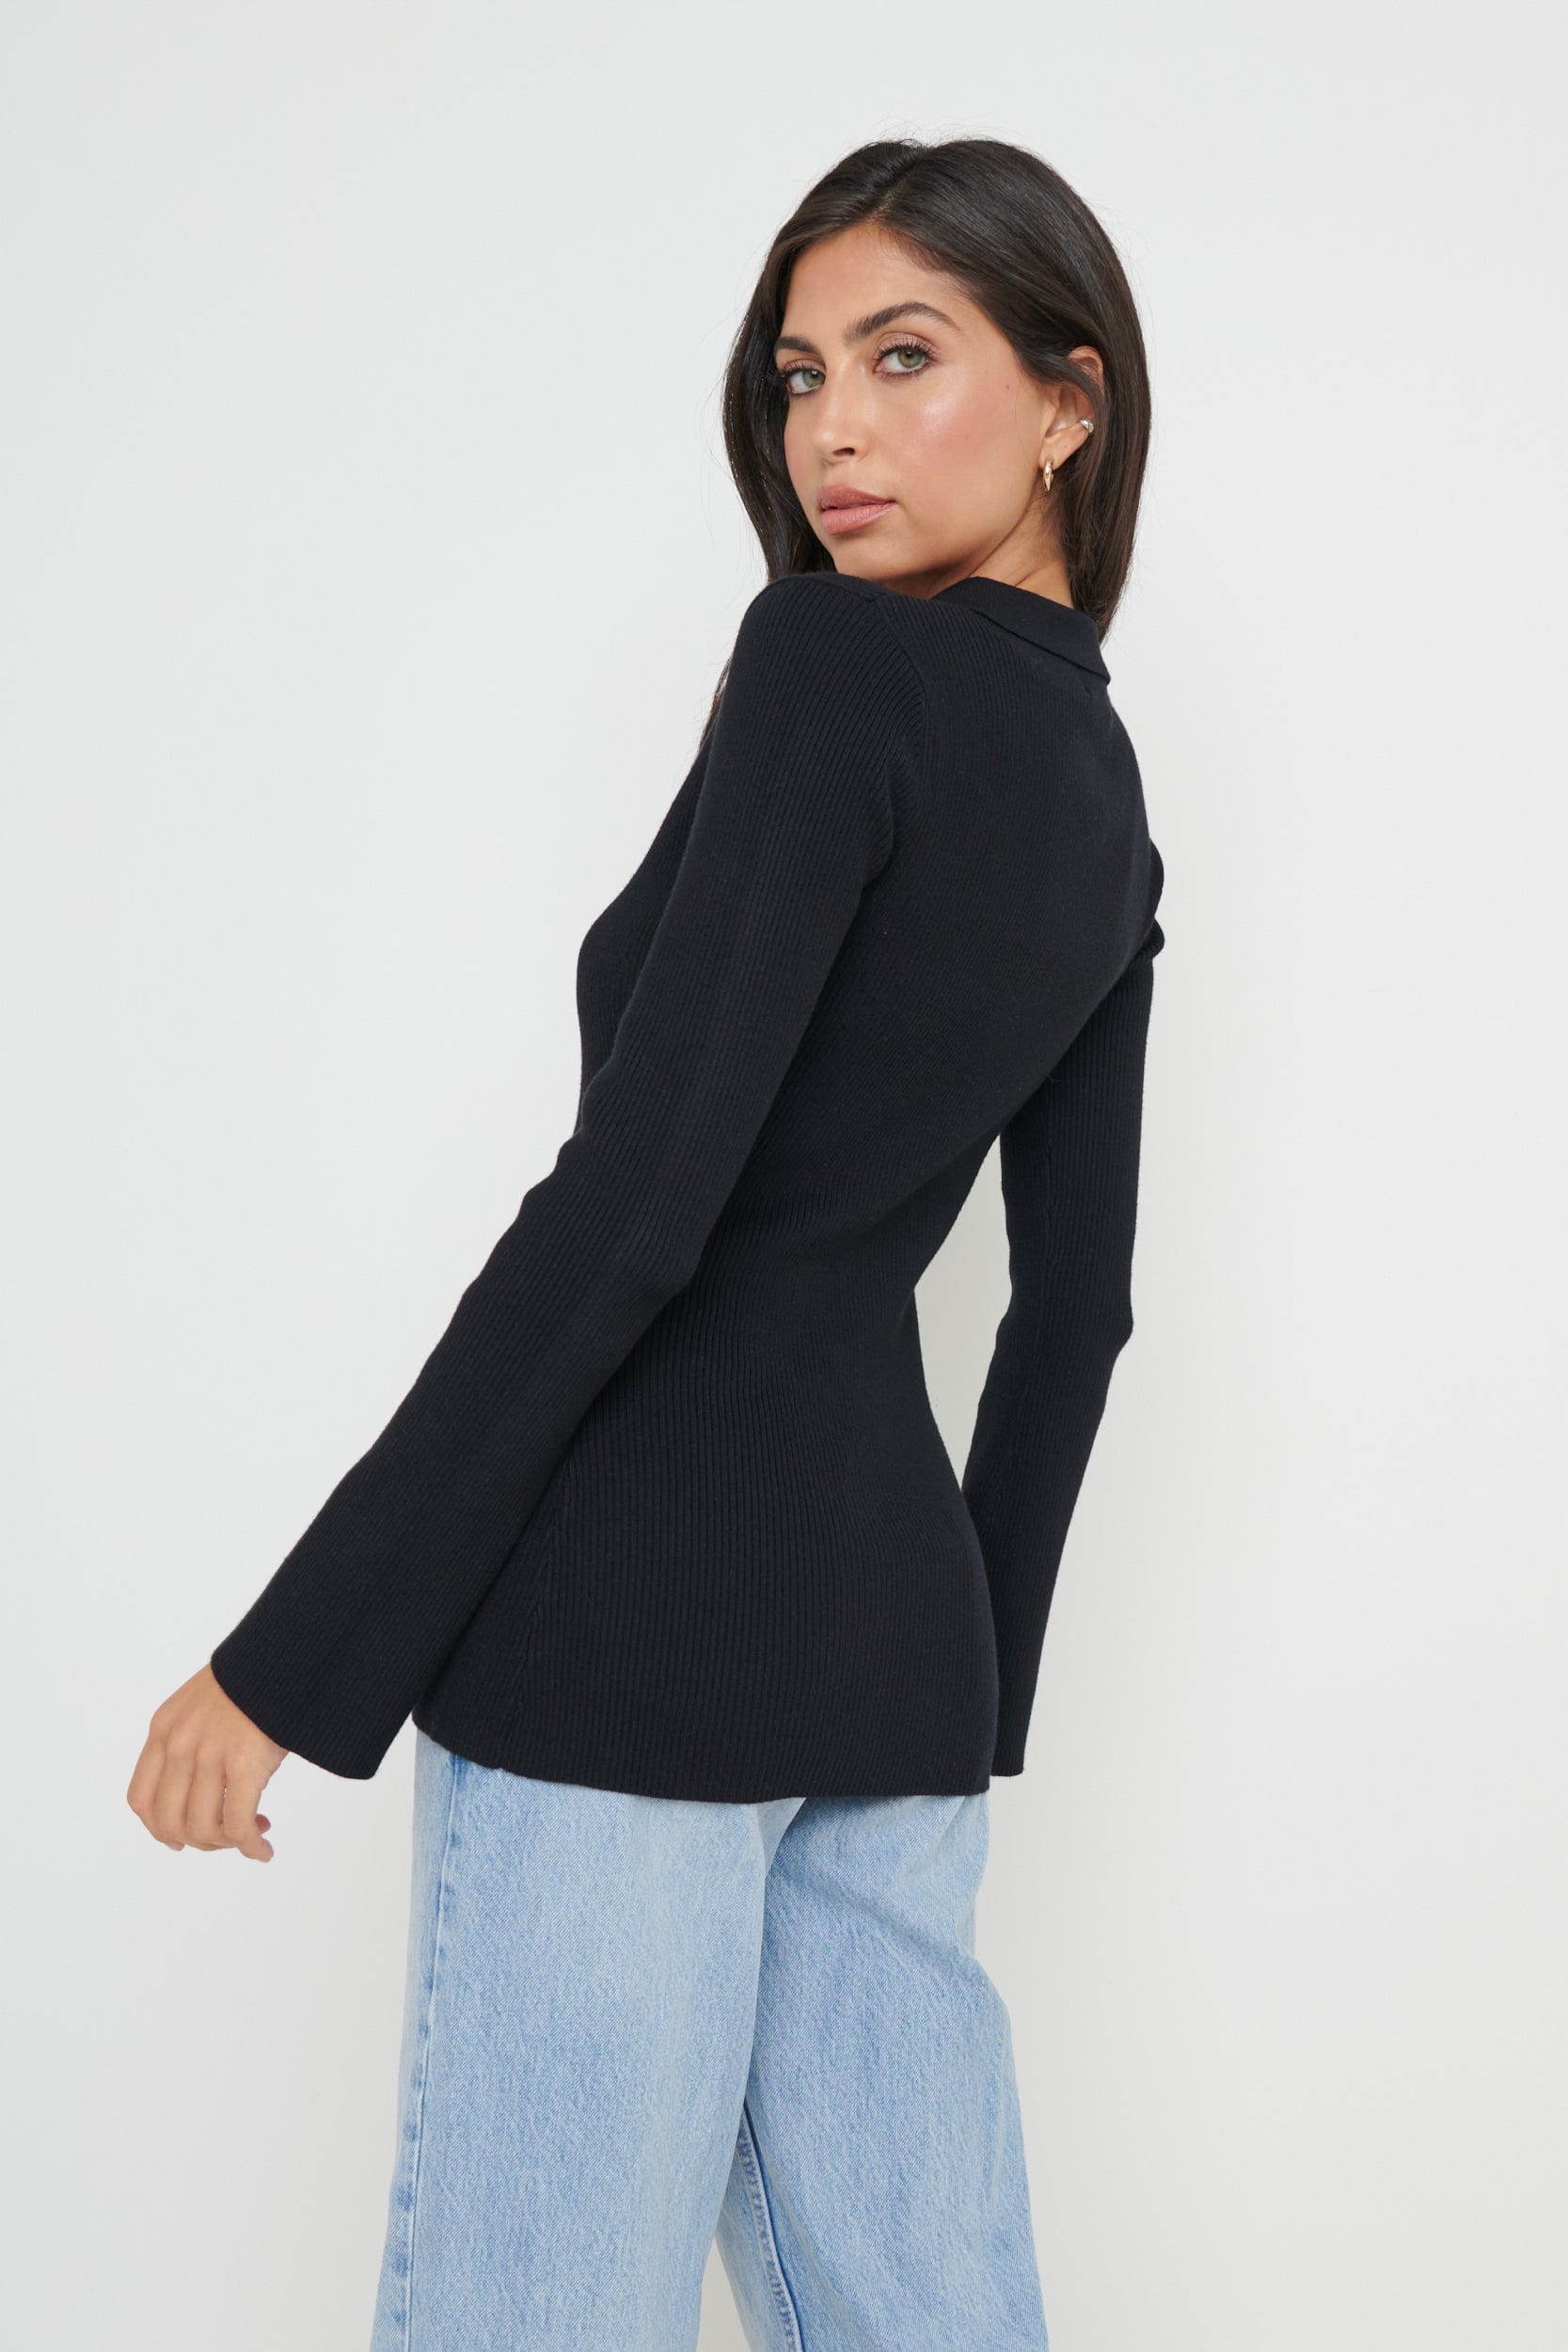 Avery Zip Knit Collared Top - Black